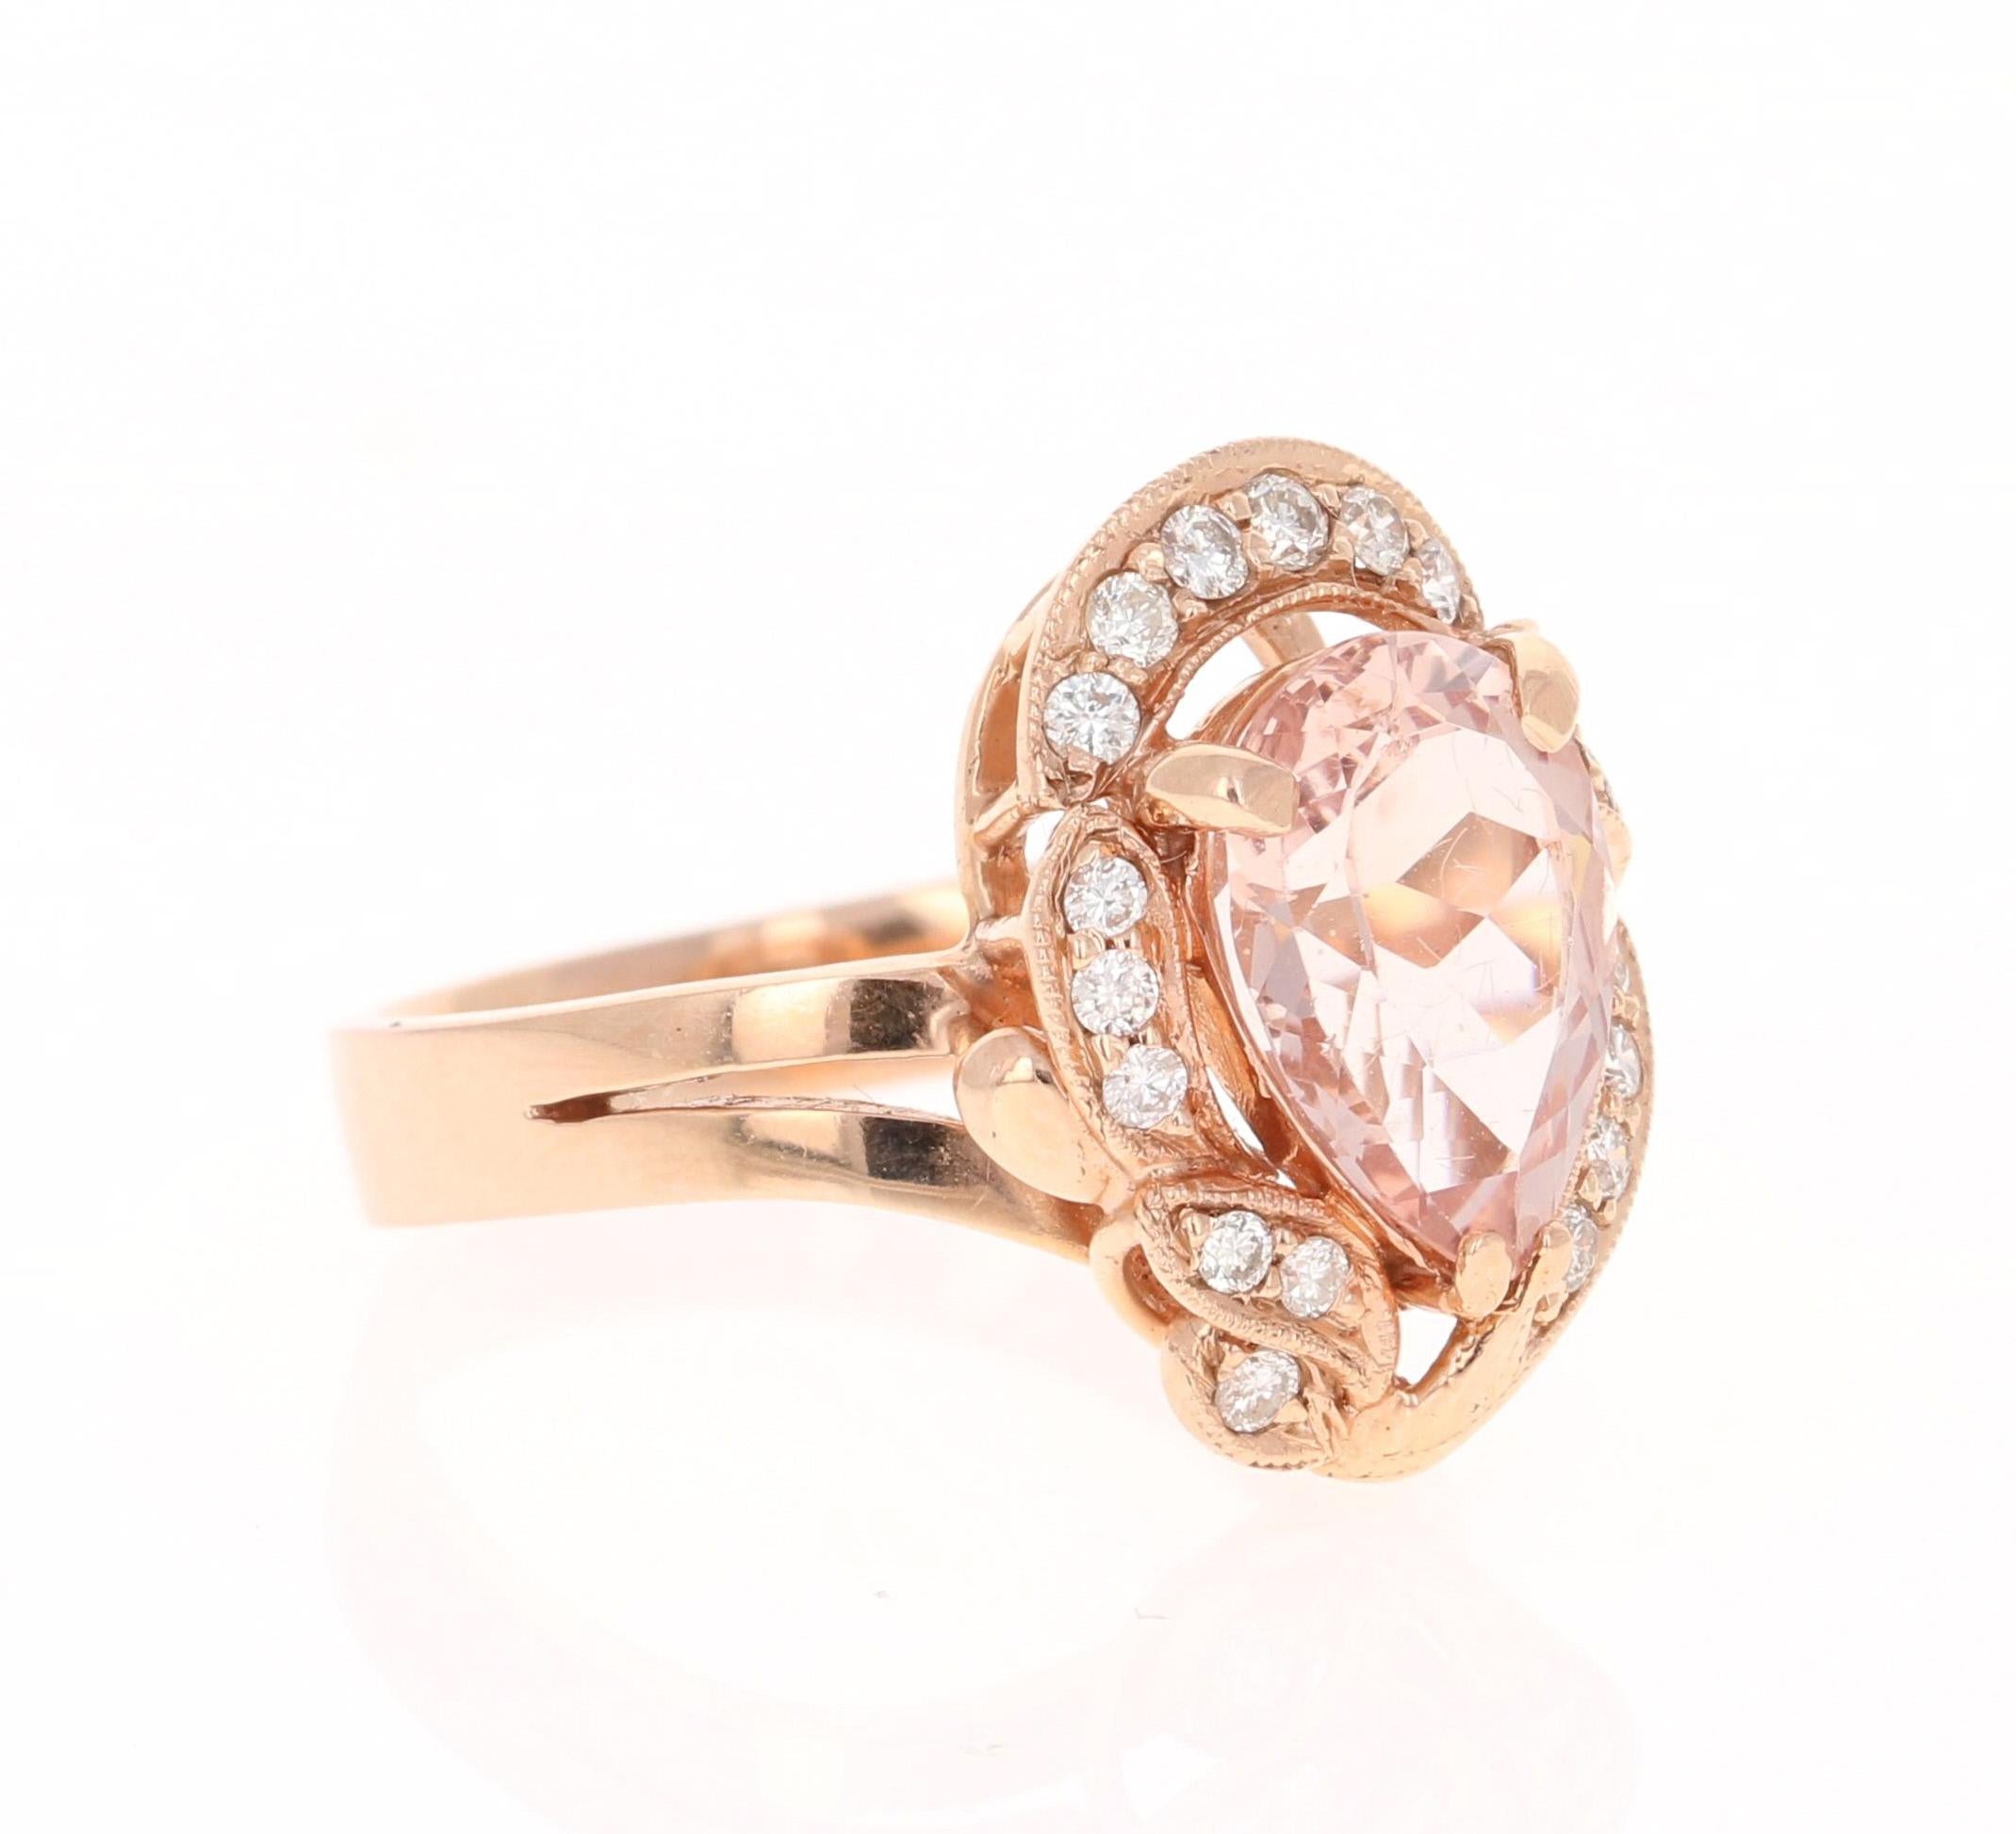 Statement Morganite Diamond Ring! 

This Morganite ring has a 2.64 Carat Pear Cut Morganite and is surrounded by 18 Round Cut Diamonds that weigh 0.34 Carats. The total carat weight of the ring is 2.98 Carats.  

The Morganite is 13 mm x 9 mm and